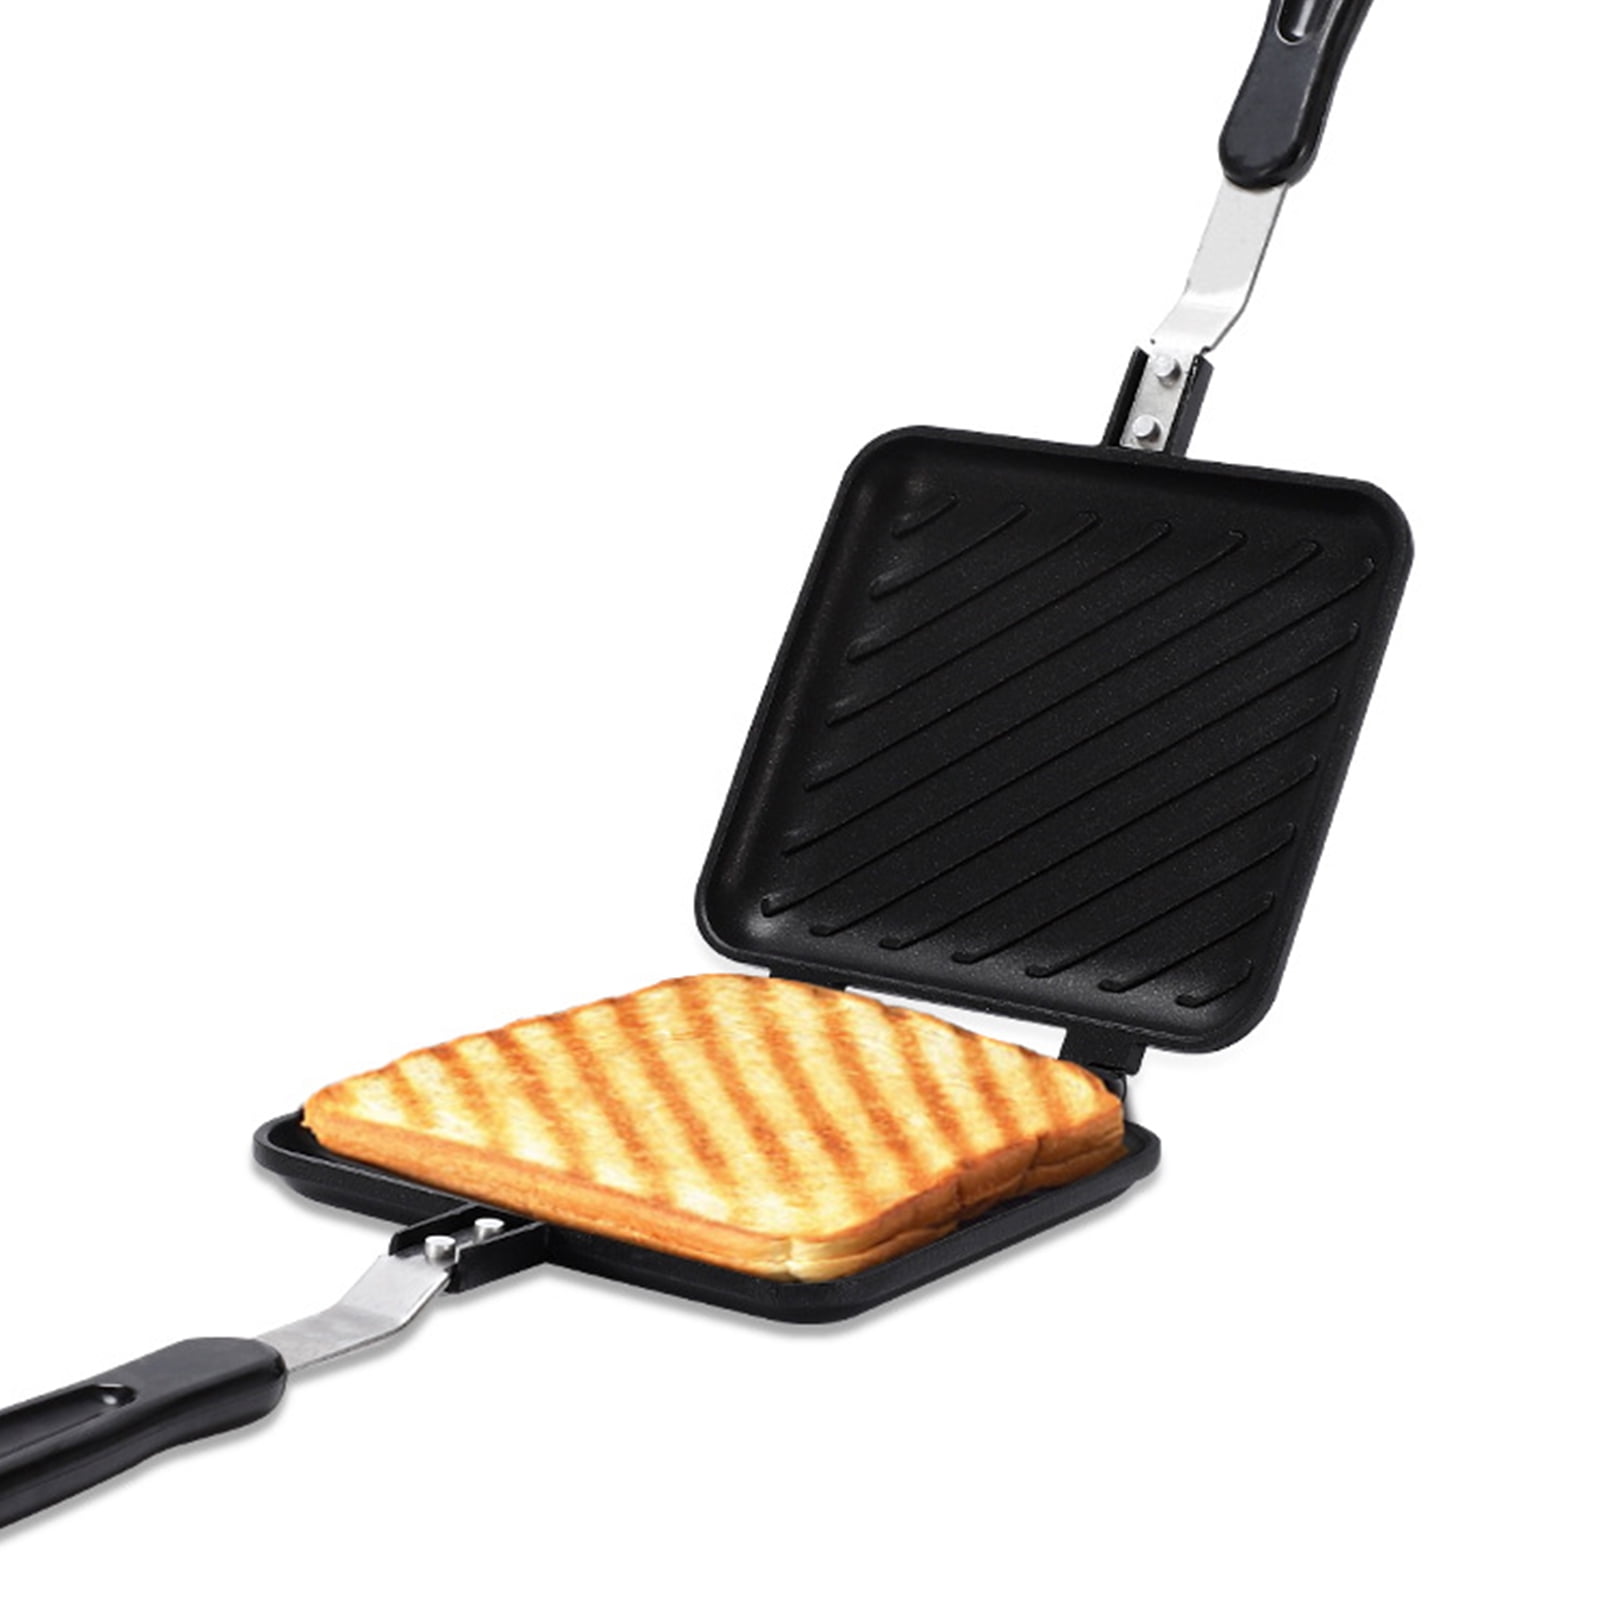 CACAGOO Breakfast Sandwich Maker, 1400W Toaster and Electric Panini Press  with 4 Slices Non-Stick Coated Plates for Sandwiches, Steaks, Eggs 